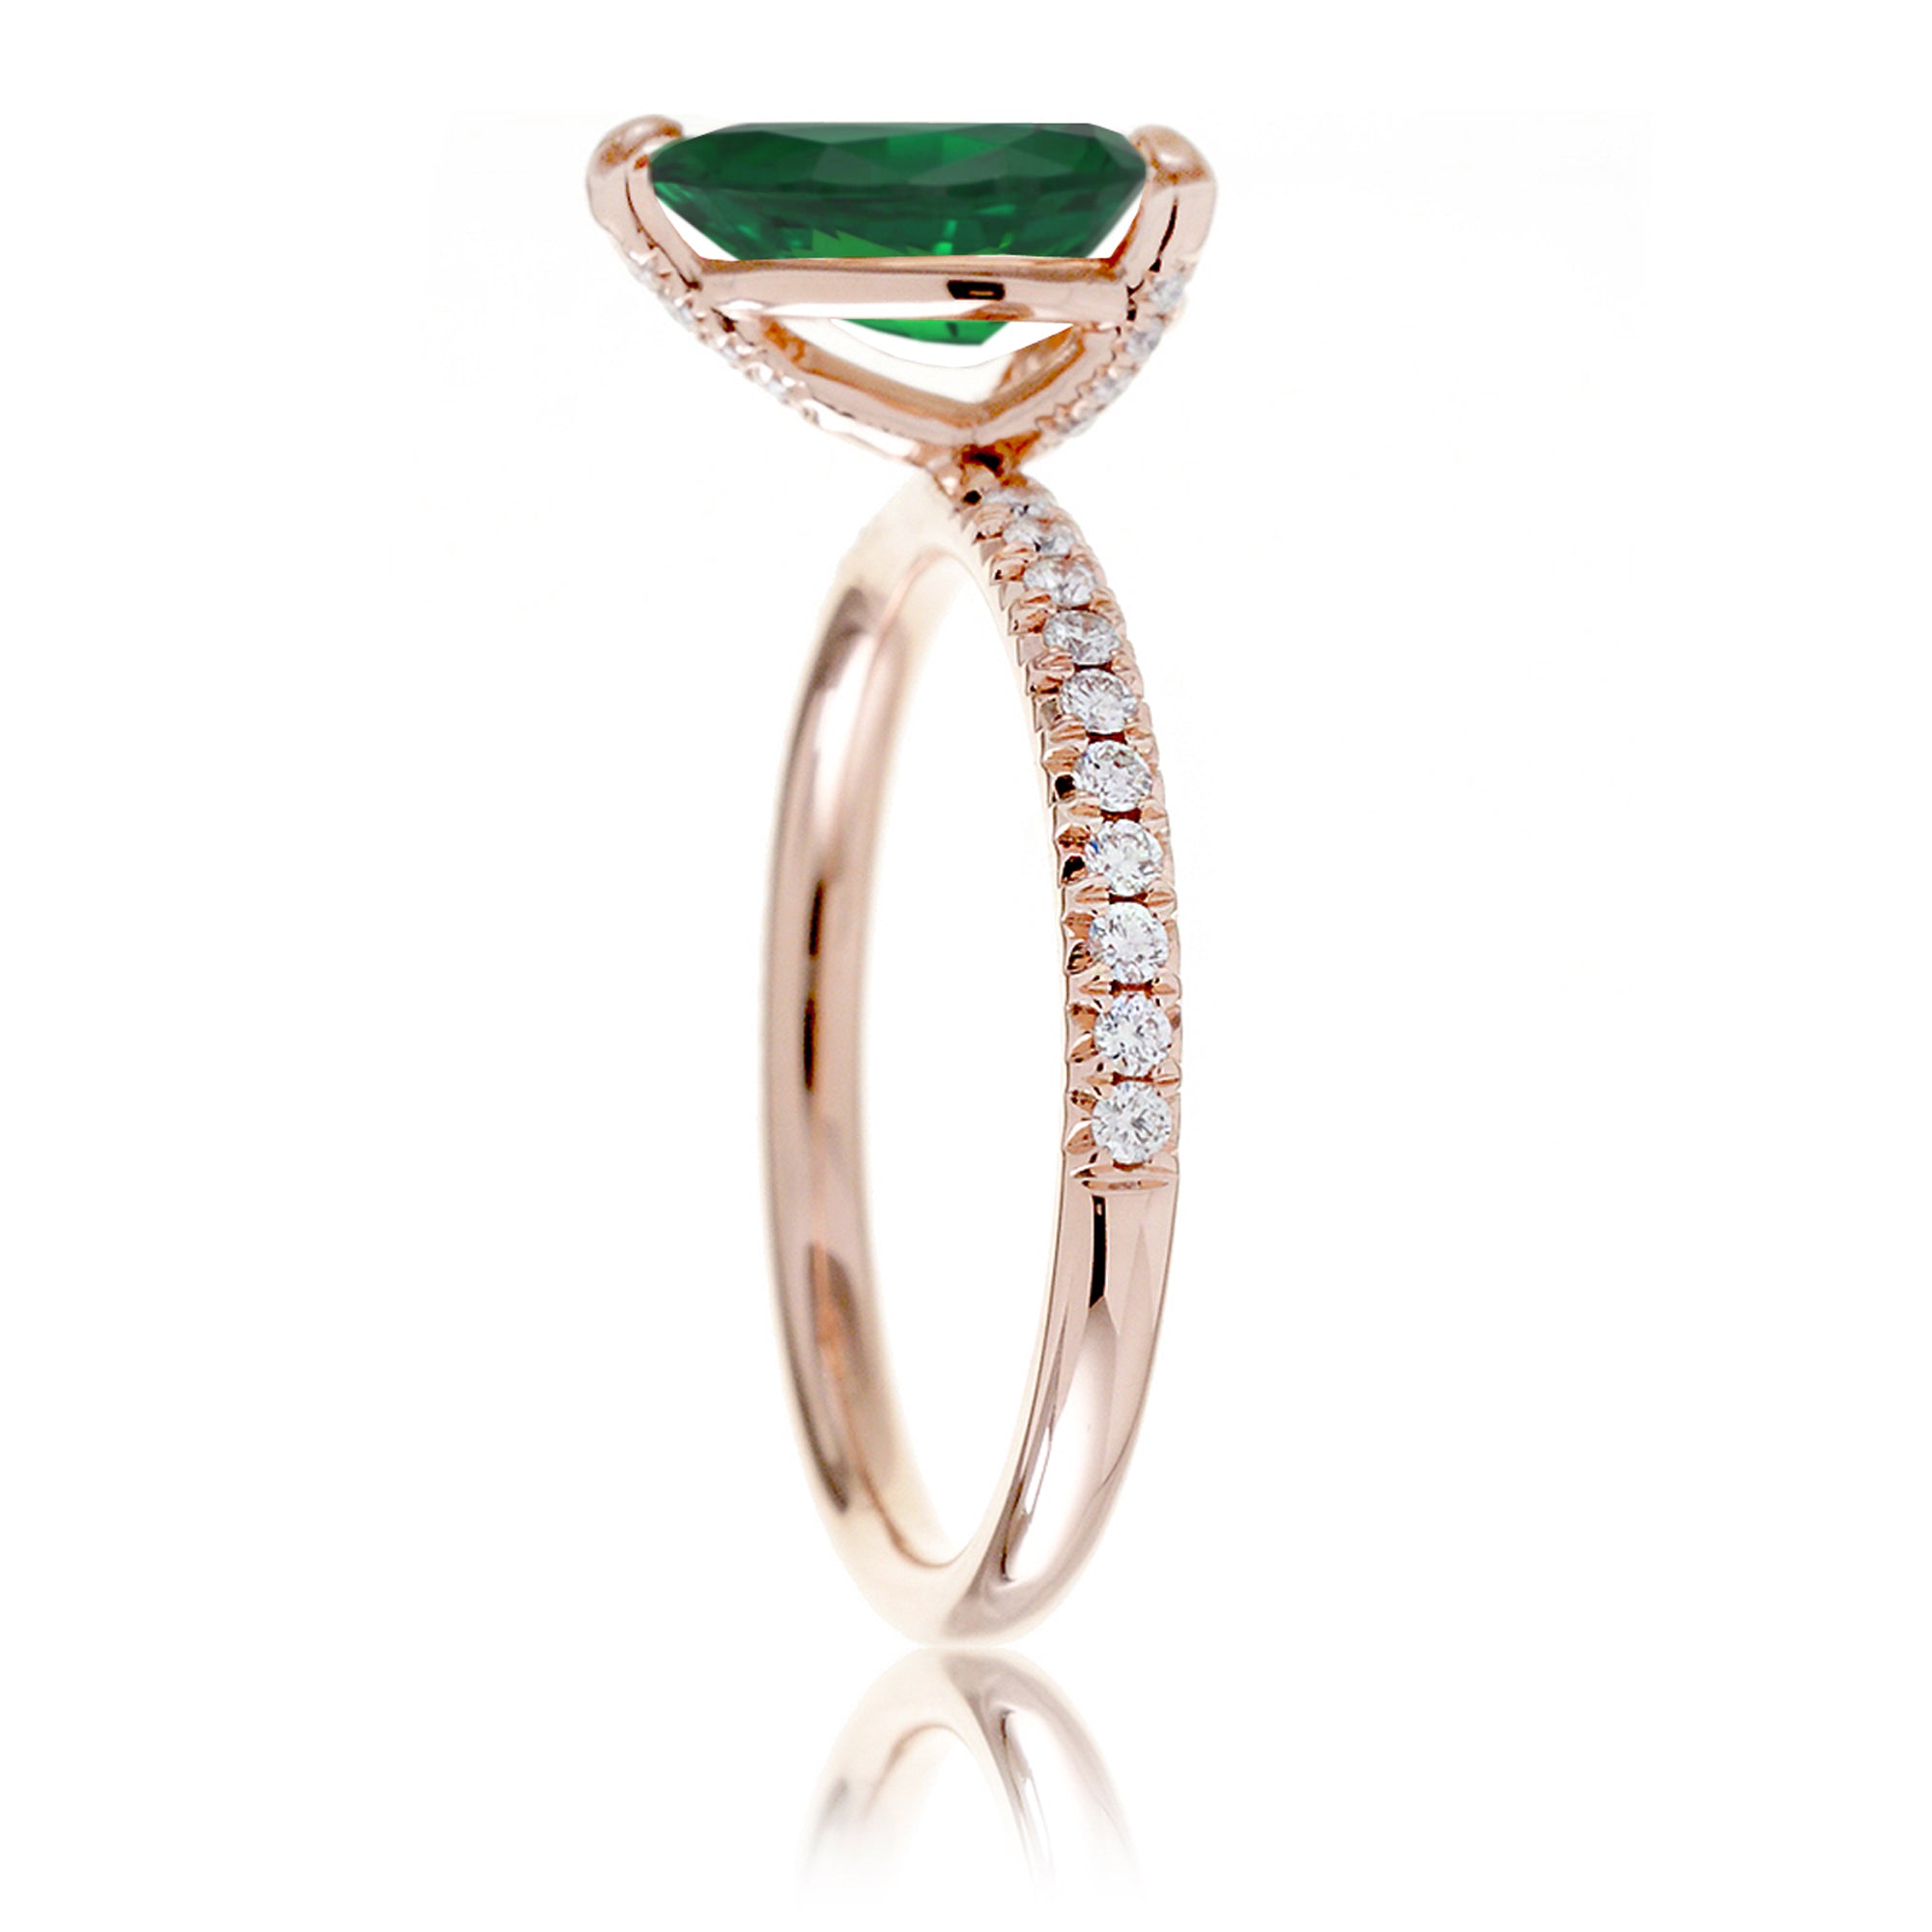 Pear green emerald diamond band engagement ring rose gold - the Ava